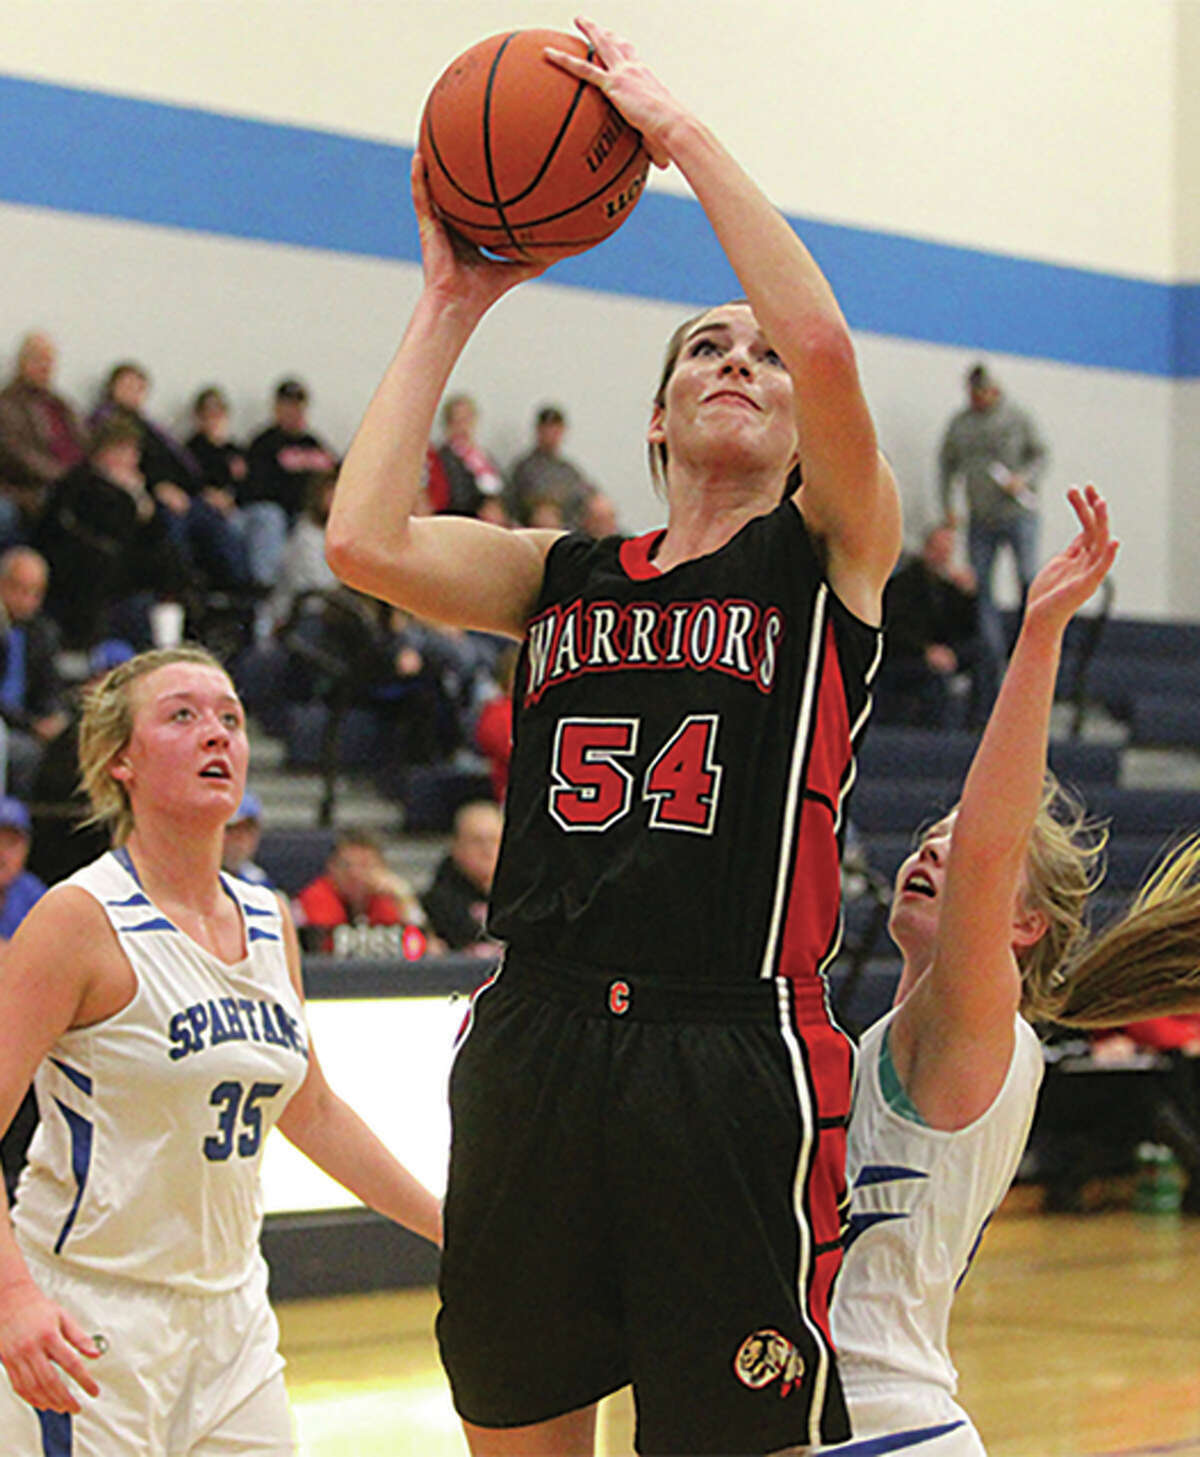 Calhoun junior Grace Baalman (54) goes up for two points in Monday win at North Greene. A two-time all-stater, Baalman leads the 9-1 Warriors with 14.5 points and 8.2 rebounds per game.